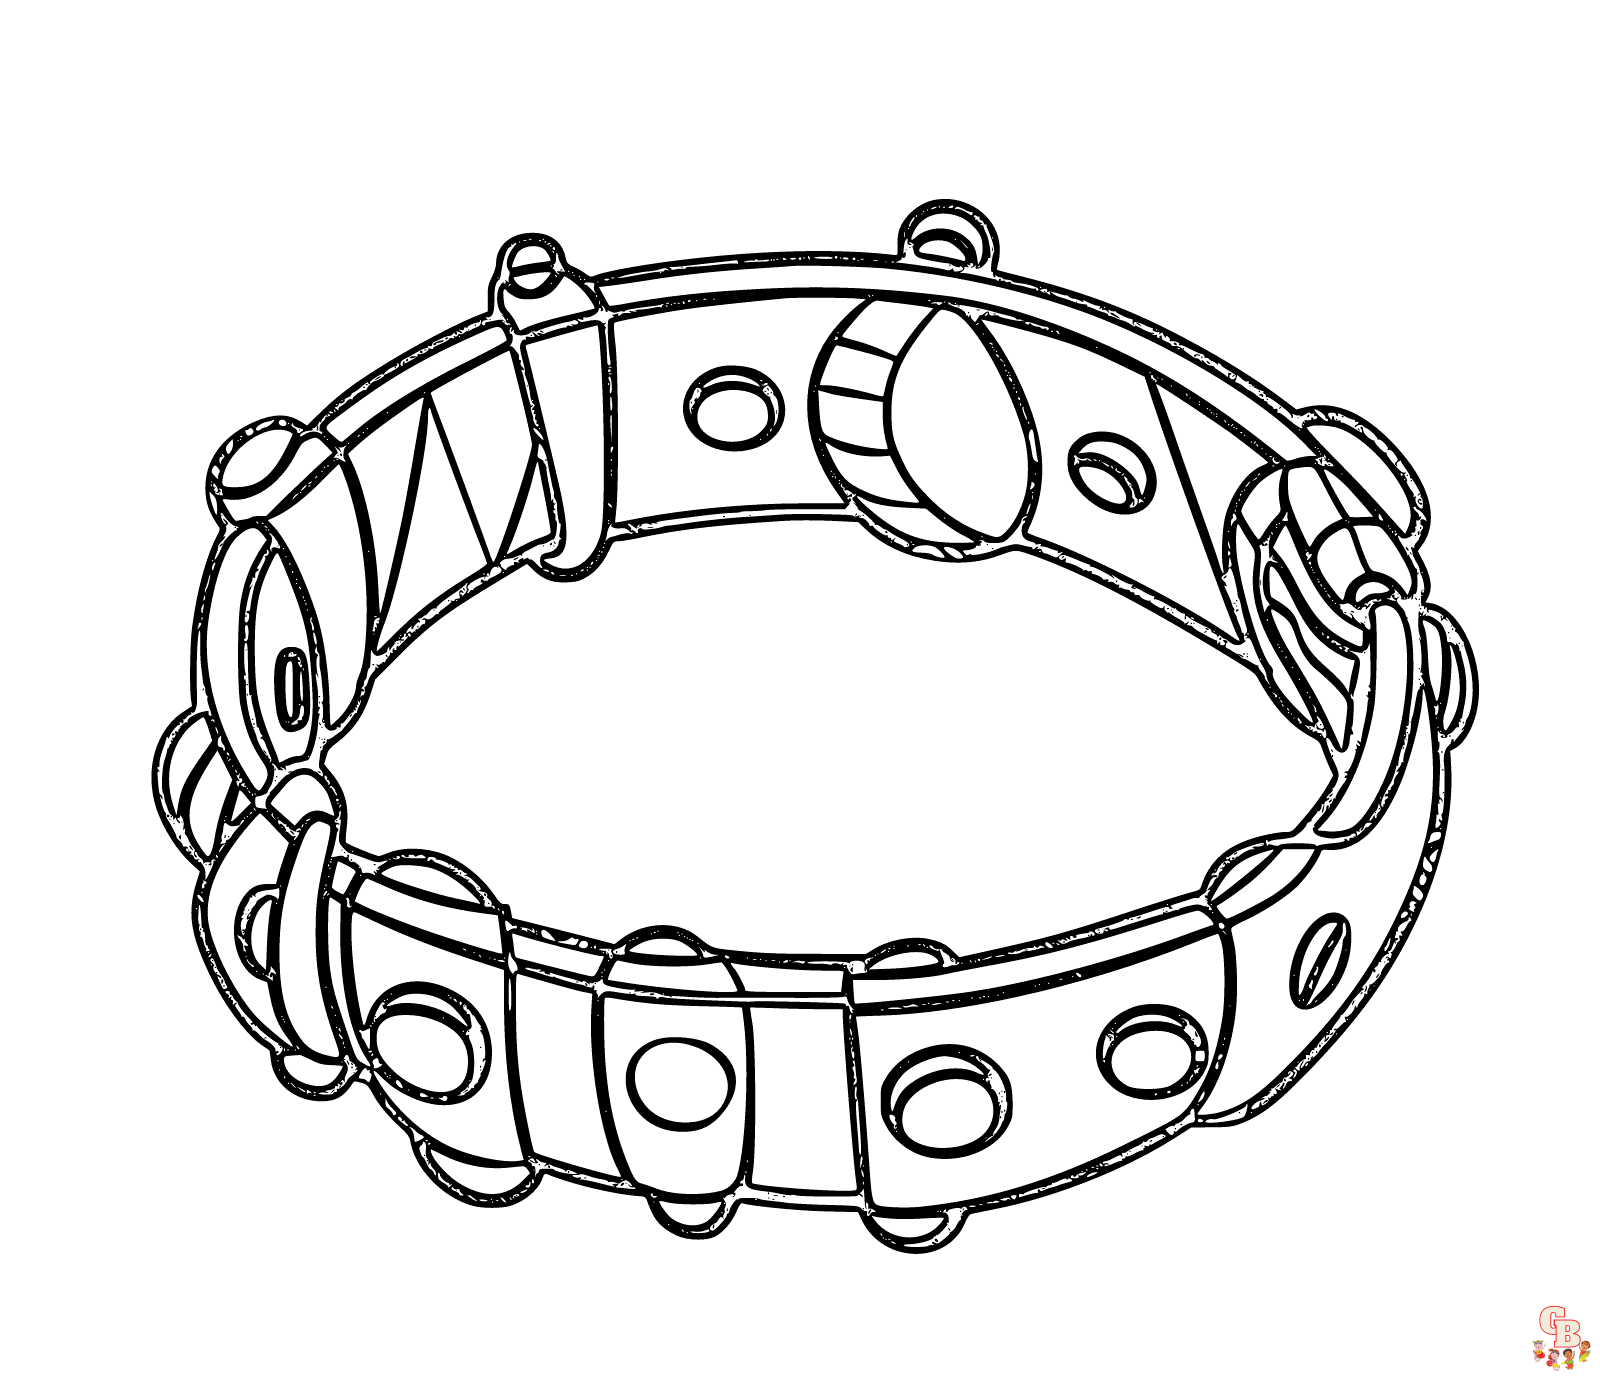 Bracelet coloring pages printable free